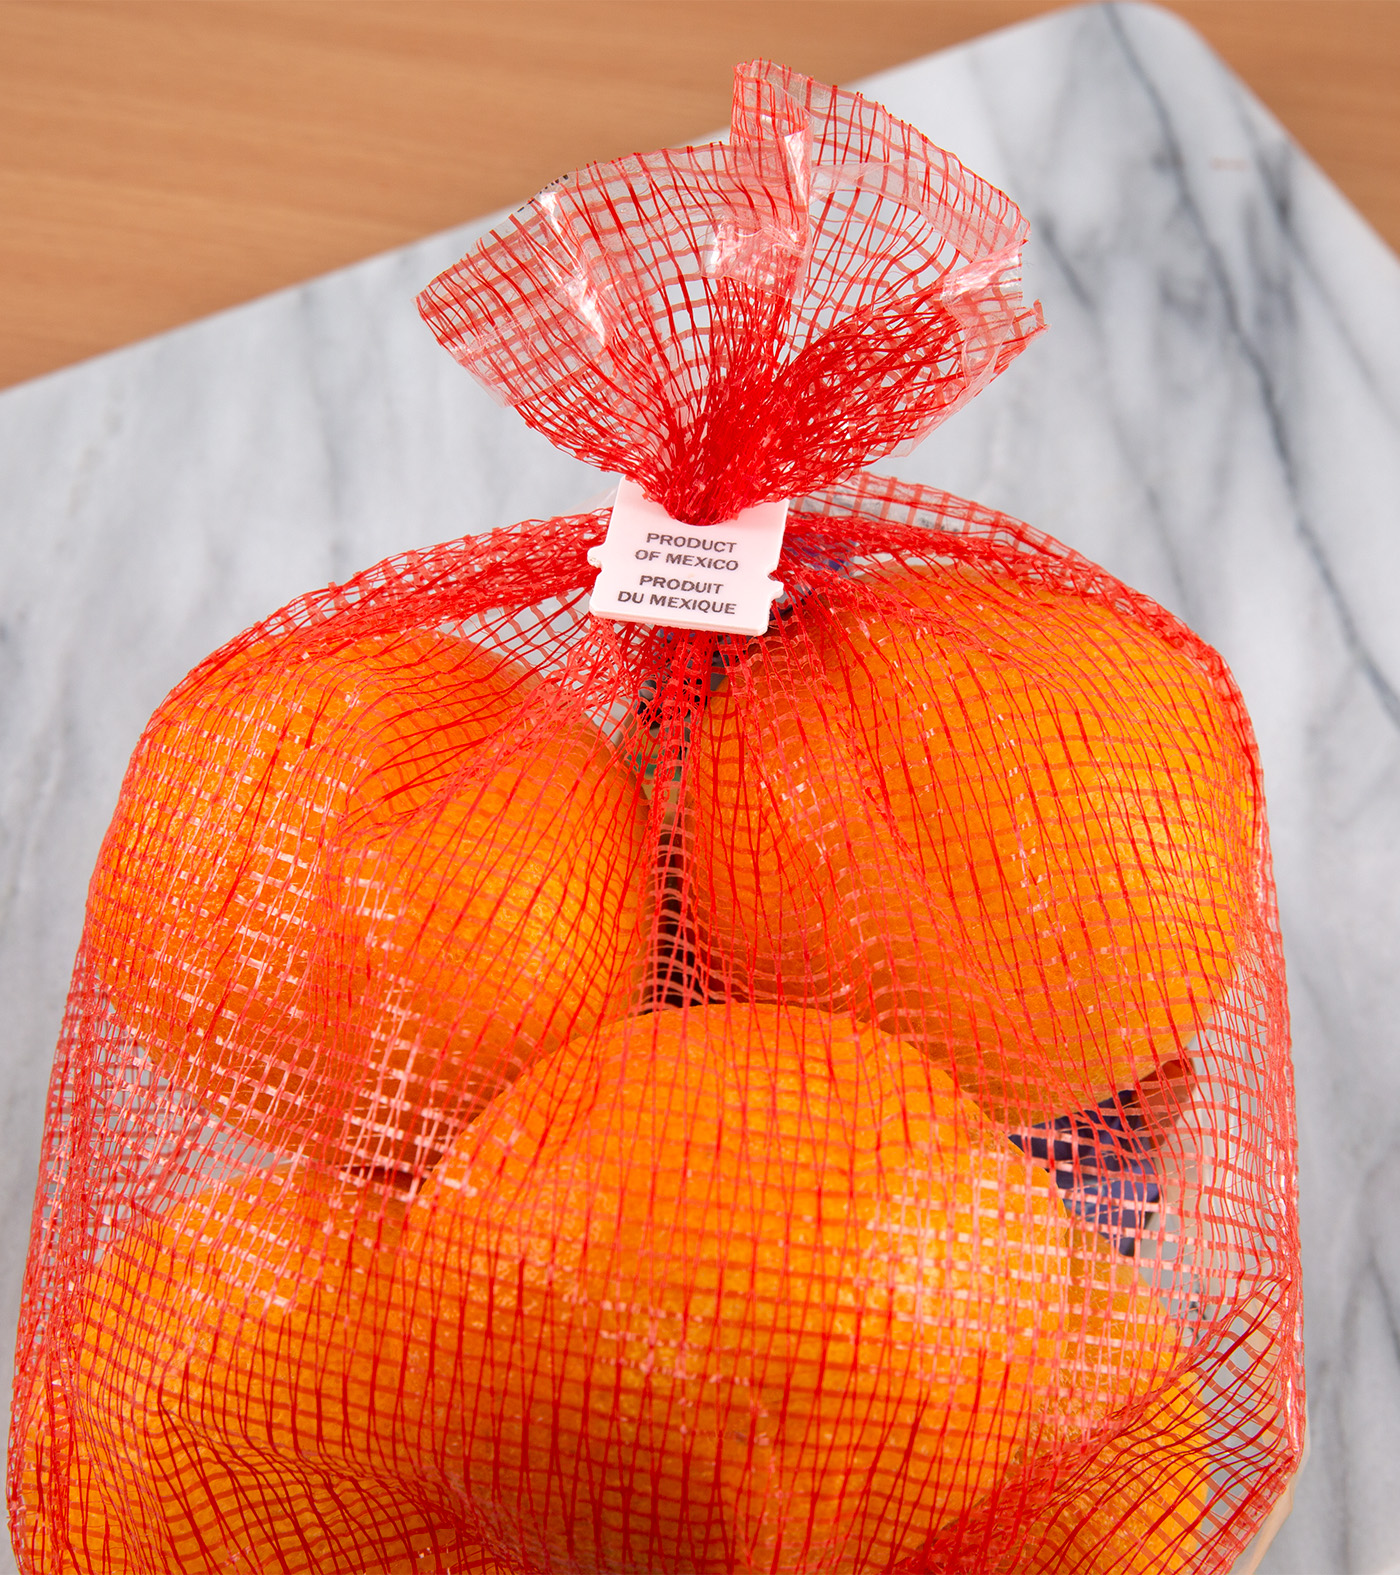 Bag of oranges with a white, tab-style bag closure with "Product of Mexico" printed on clip.